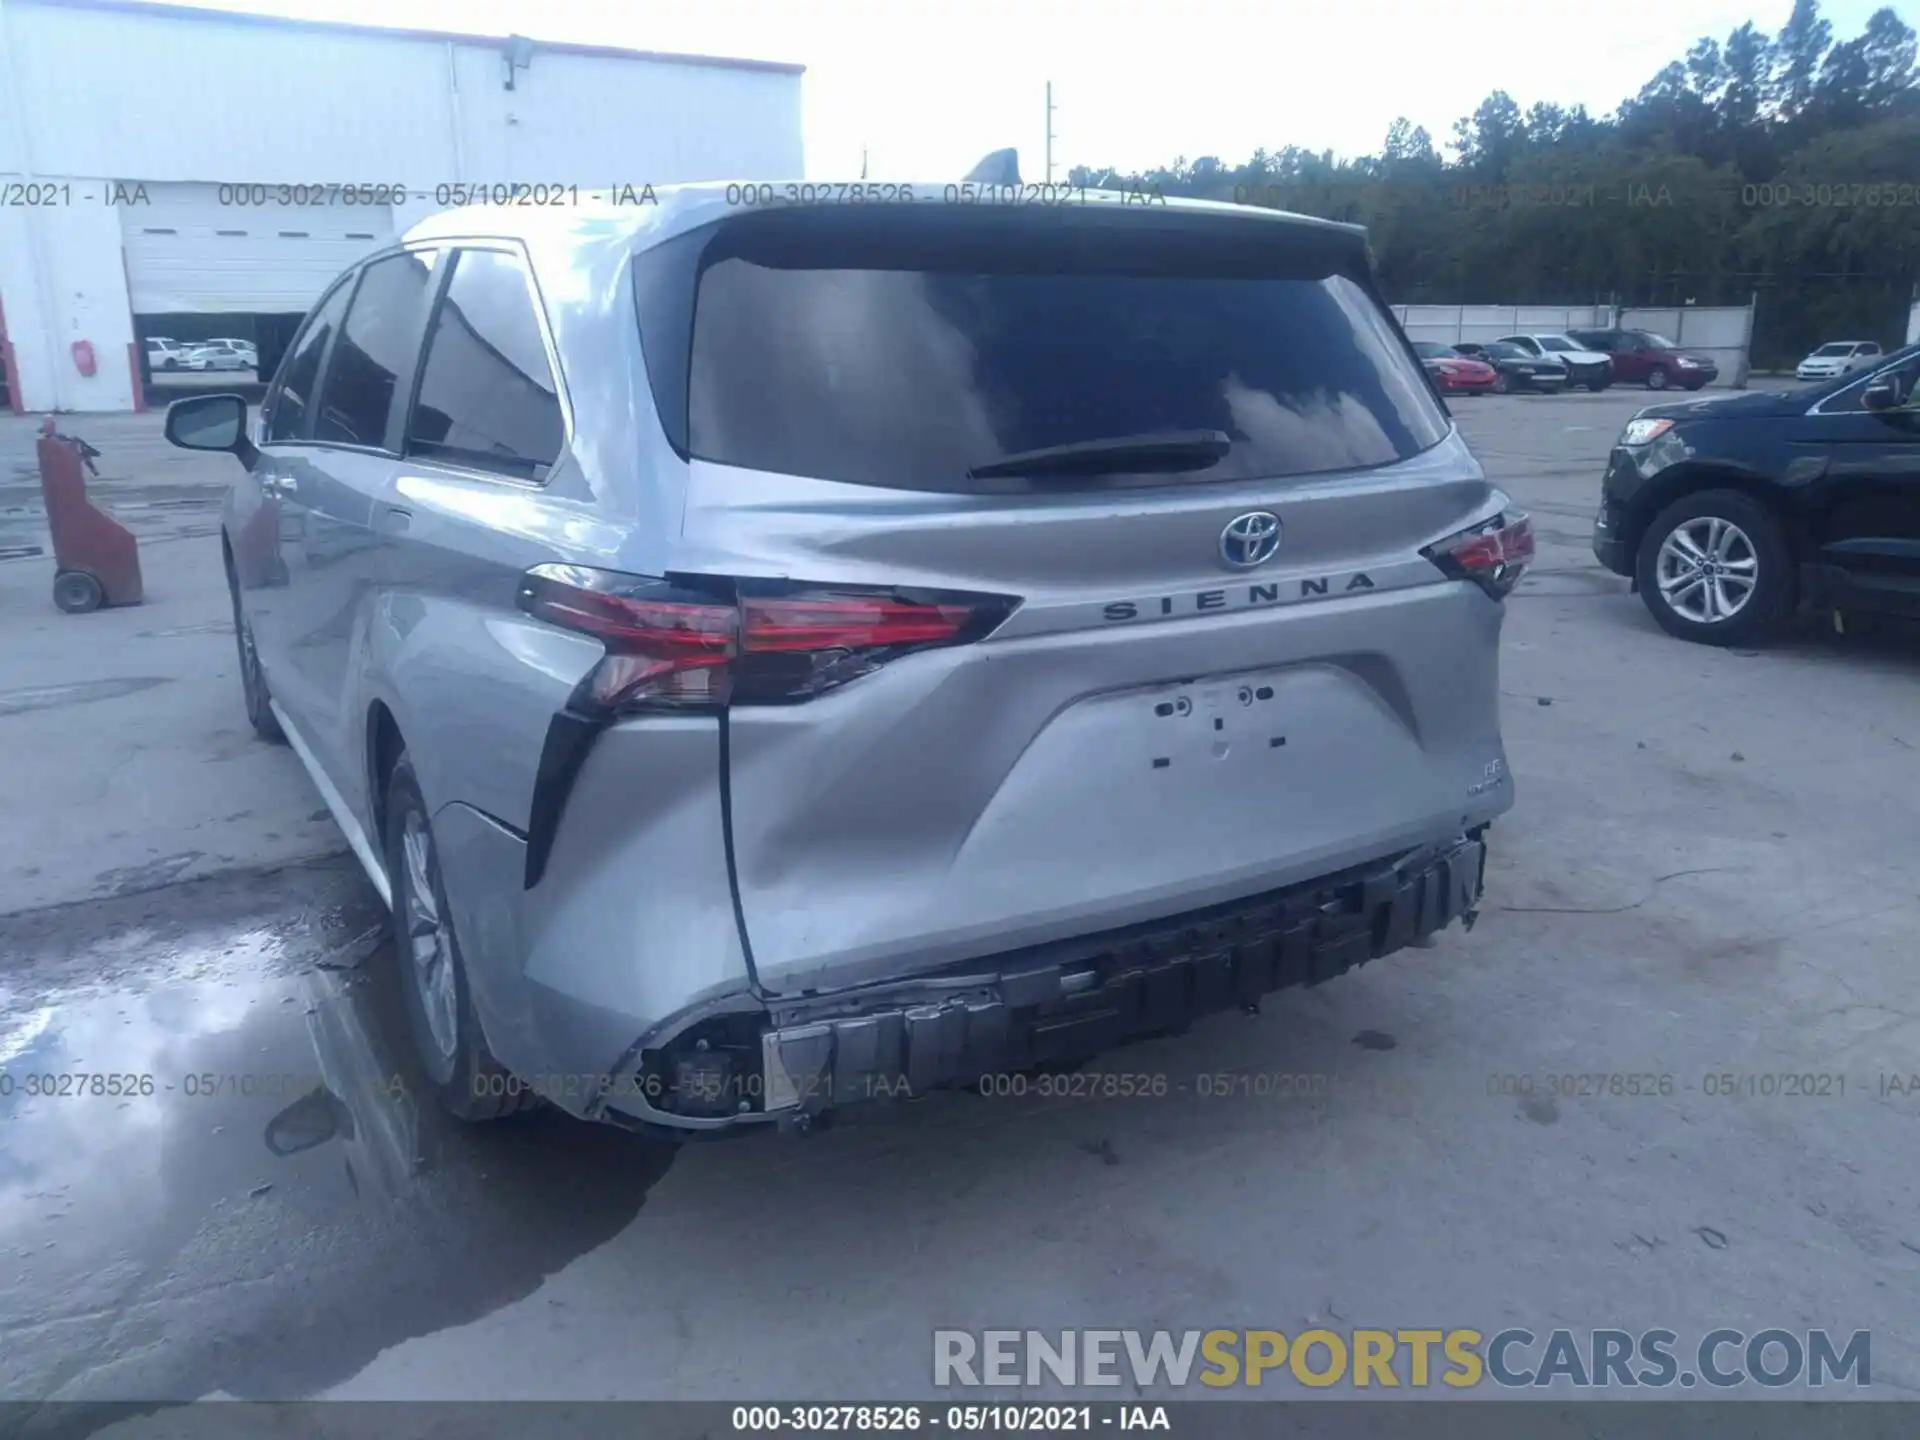 6 Photograph of a damaged car 5TDKRKEC1MS017079 TOYOTA SIENNA 2021